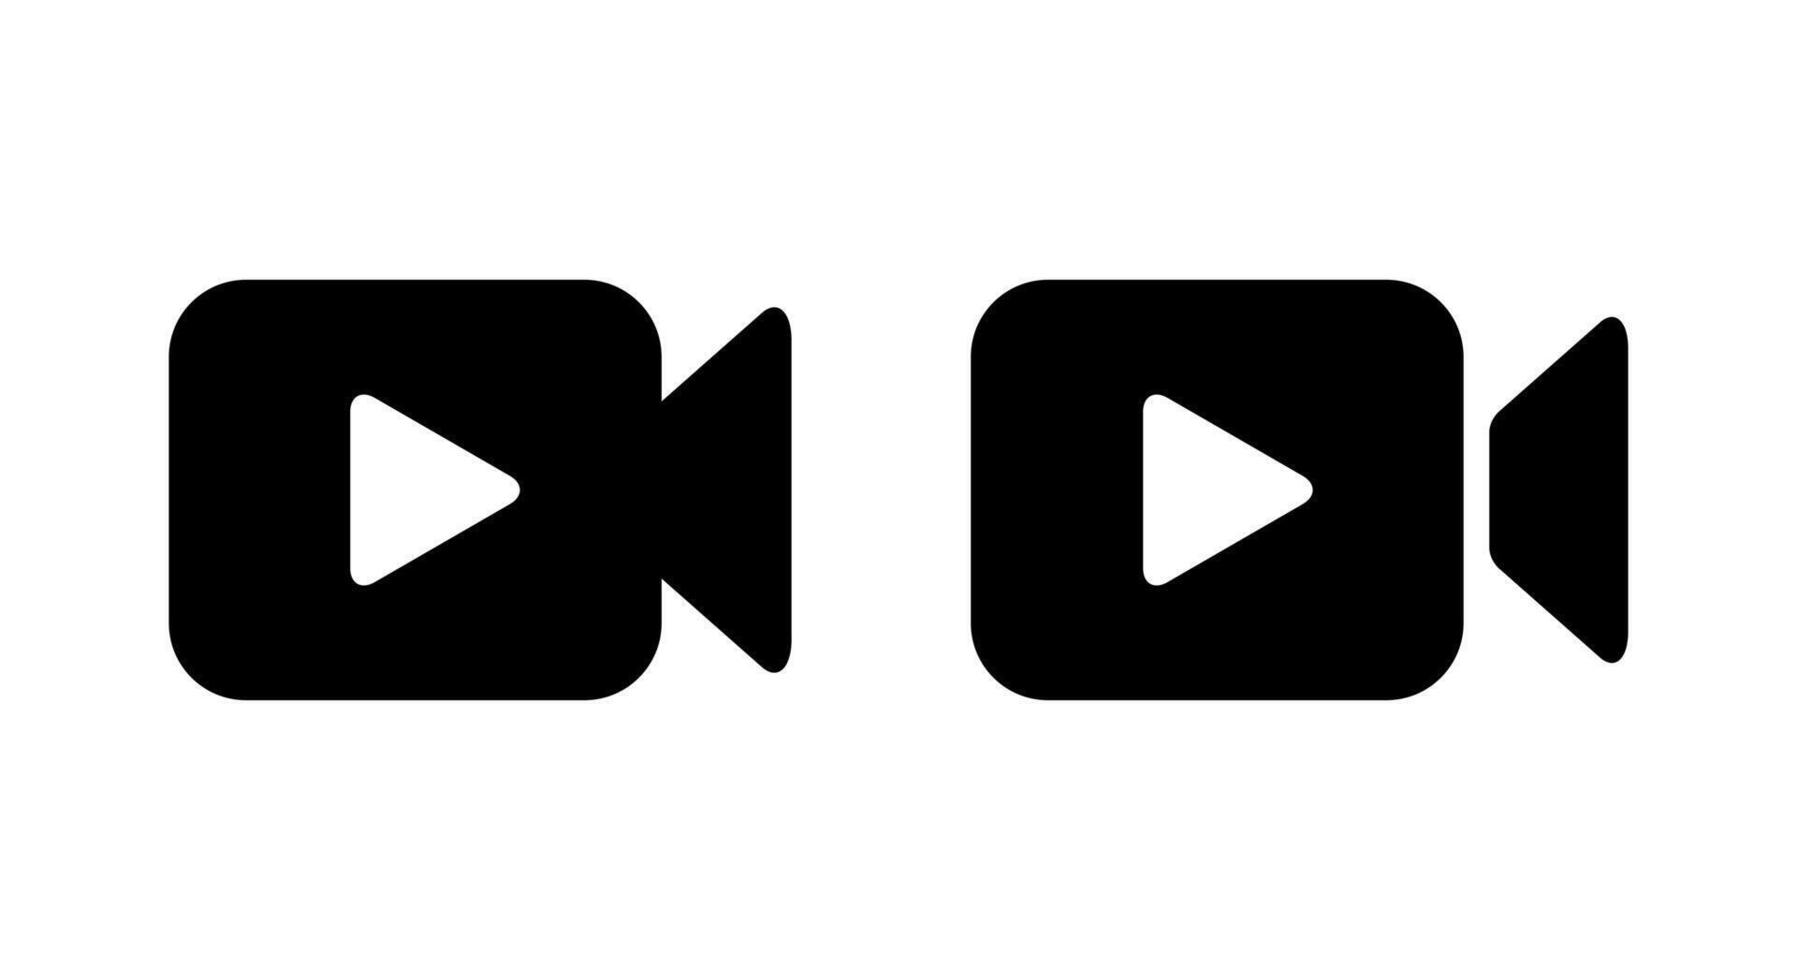 Video player icon vector in trendy style. Play button on video camera symbol